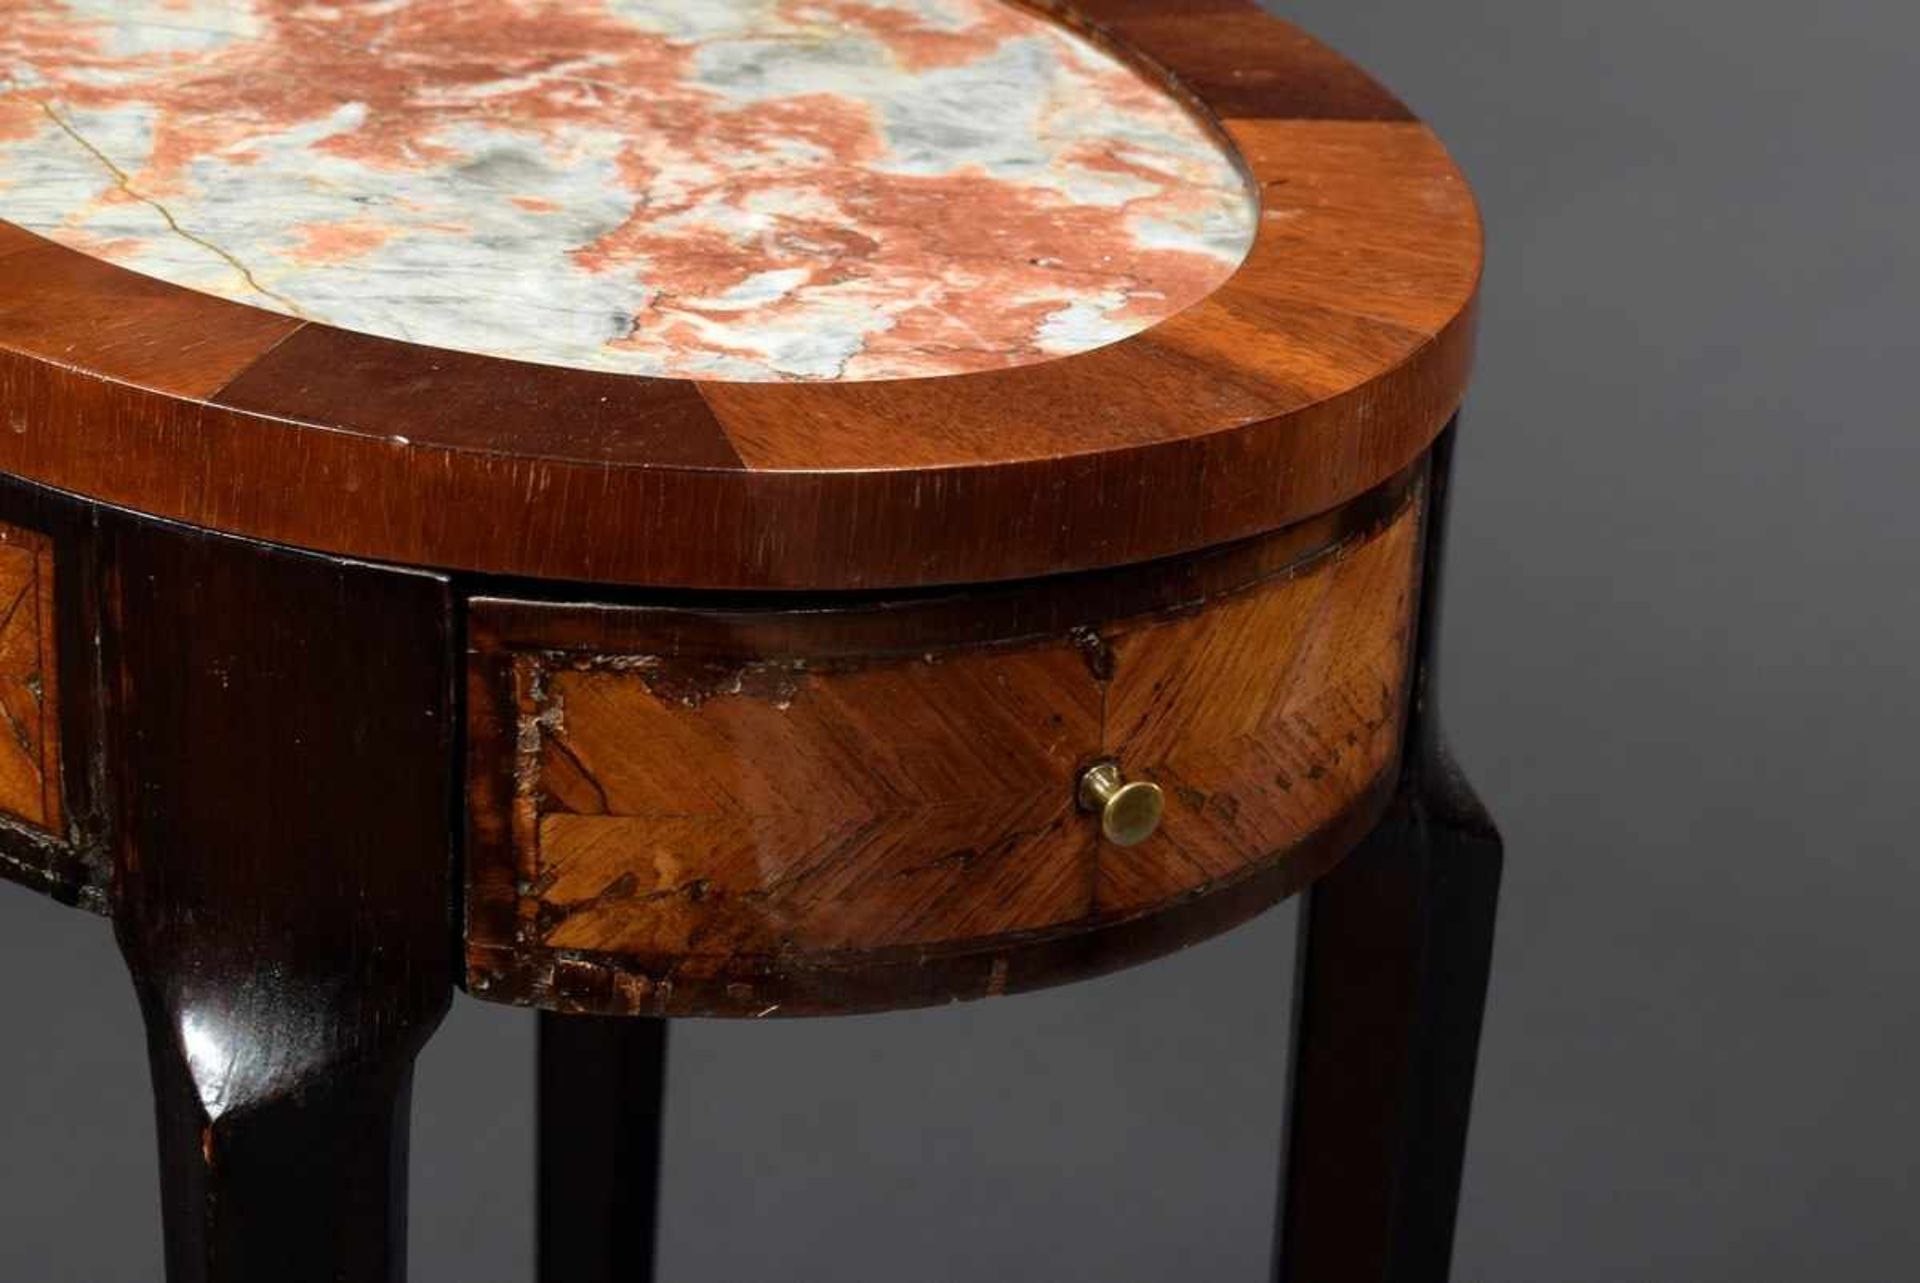 Oval "Table tricoteuse" with white-reddish marble top and optical marquetry, on curved legs with - Image 4 of 8